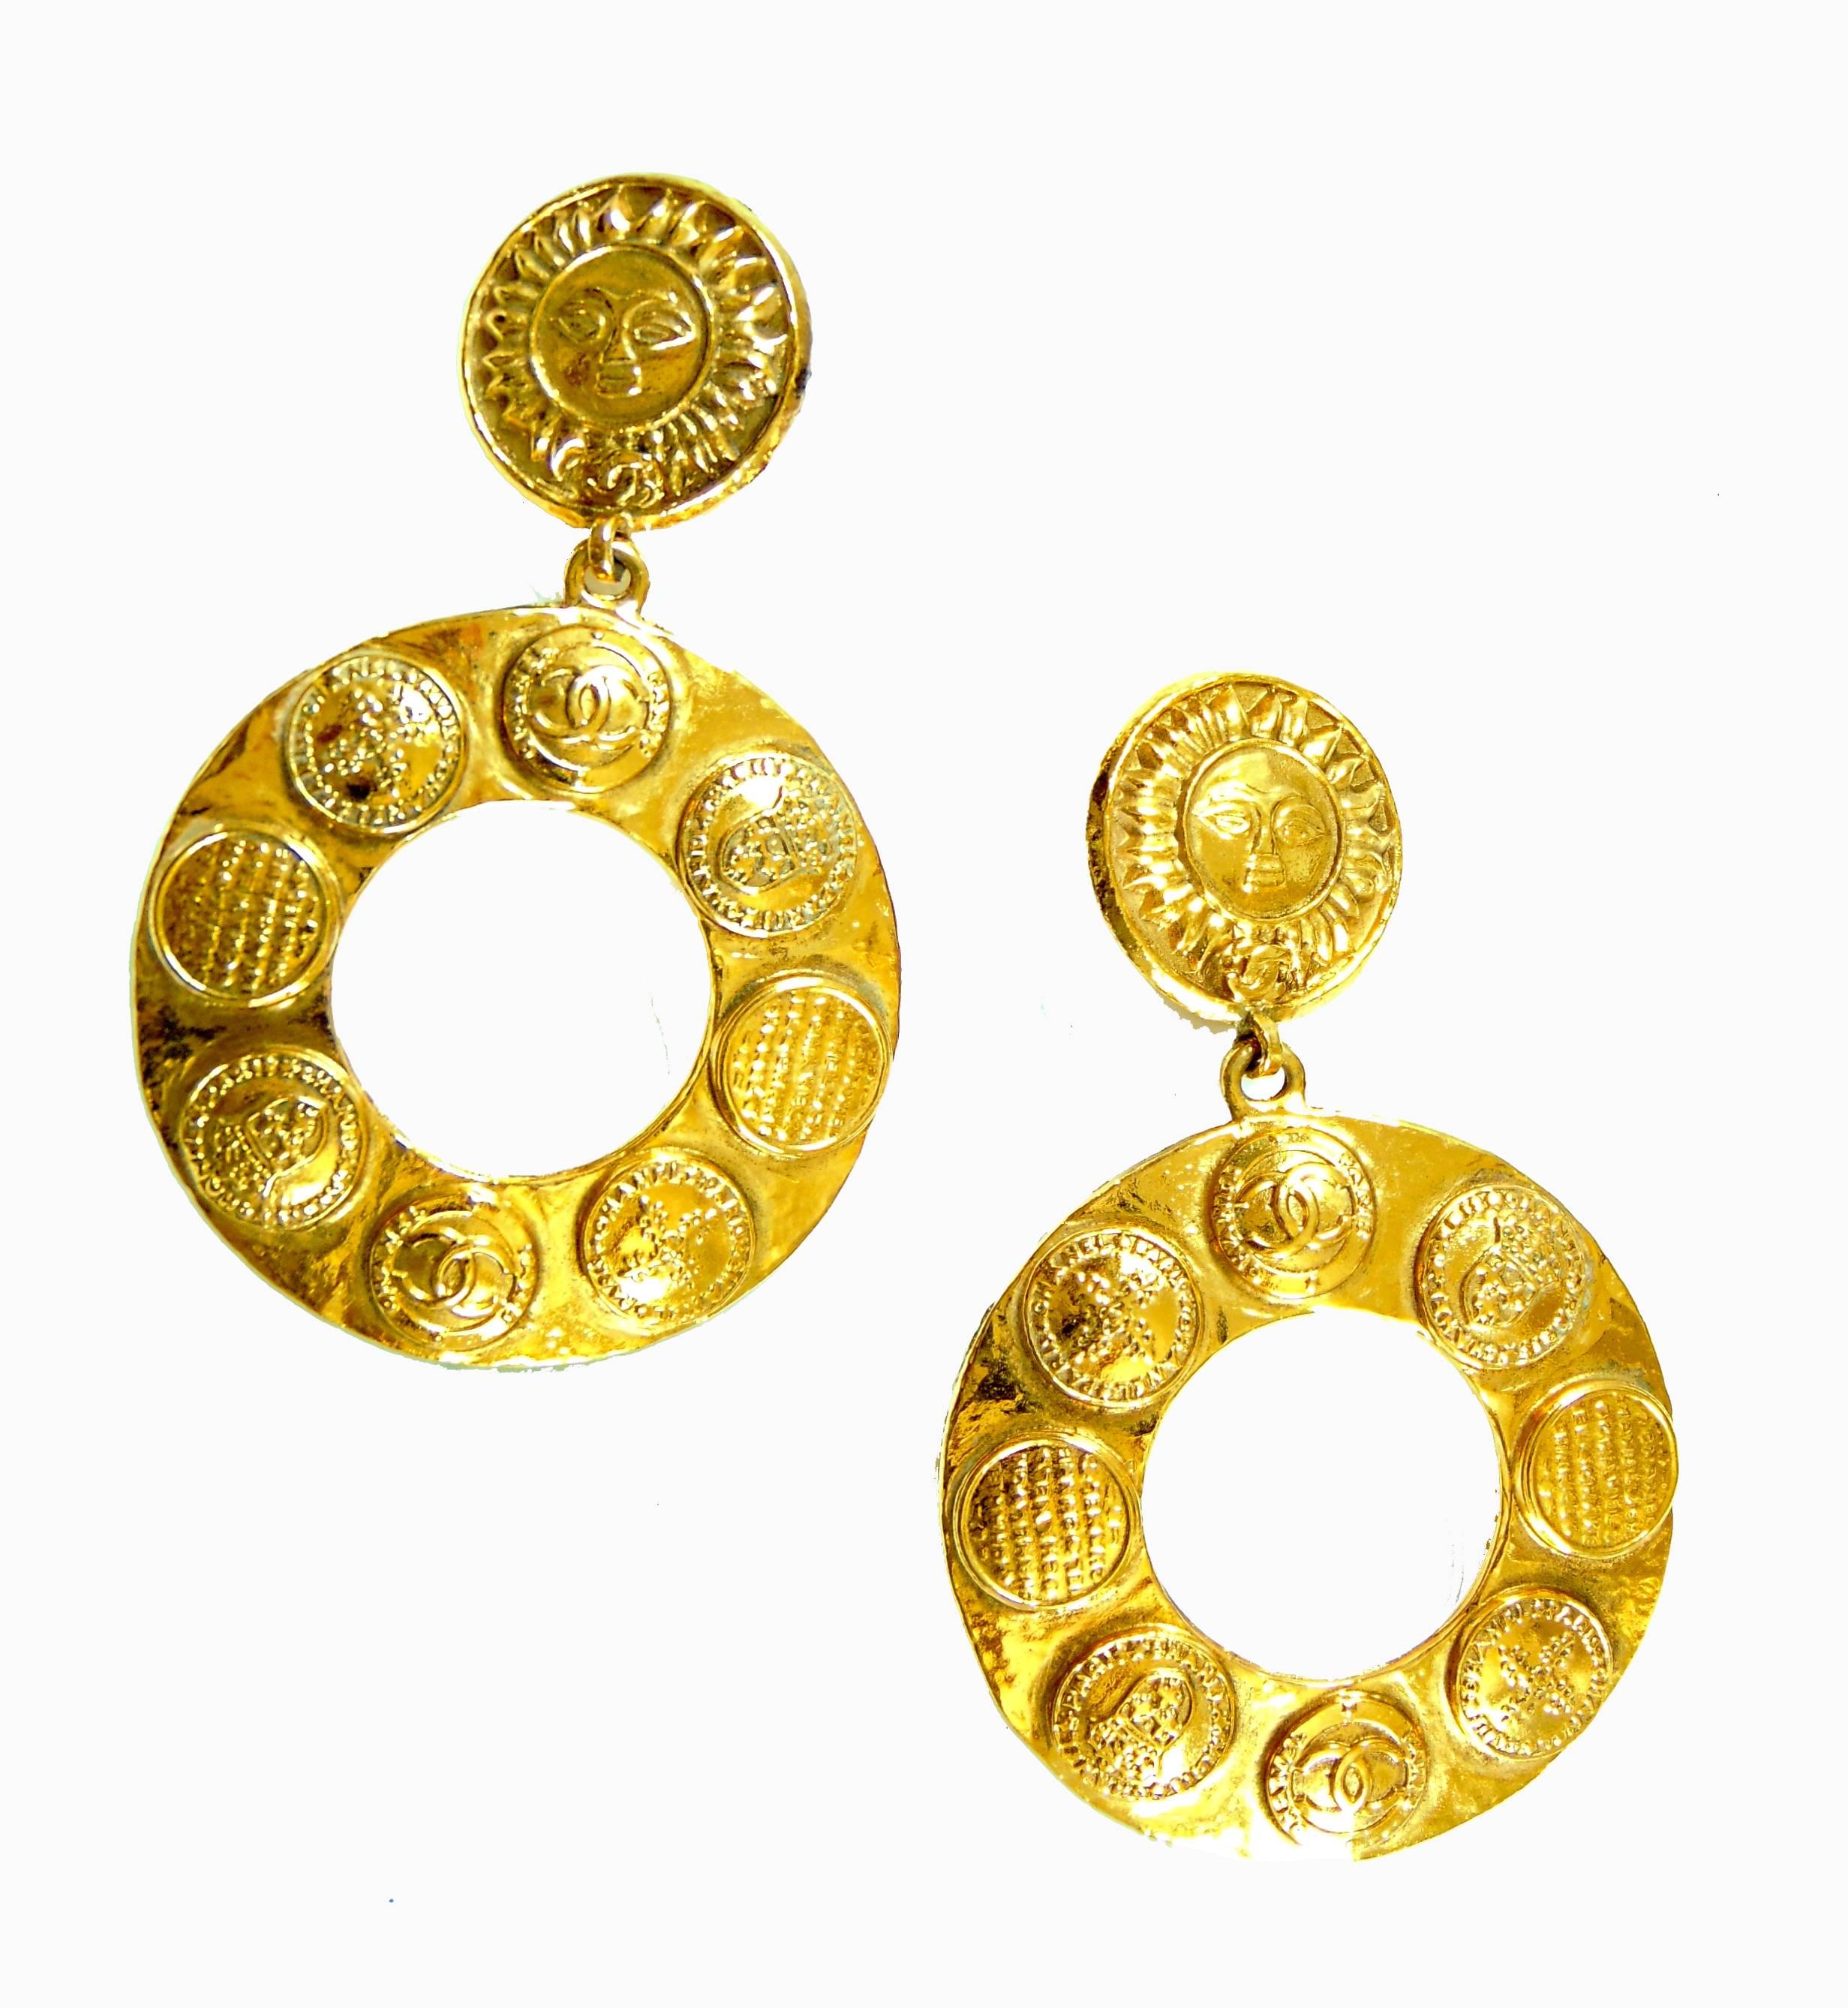 Here's a fabulous pair of MASSIVE hoop earrings from CHANEL! Made from gold metal, these babies measure appx 3.5in long x 2in wide. The clip portion has a sun motif and the hoops feature the CC logo and various medallions throughout. In excellent